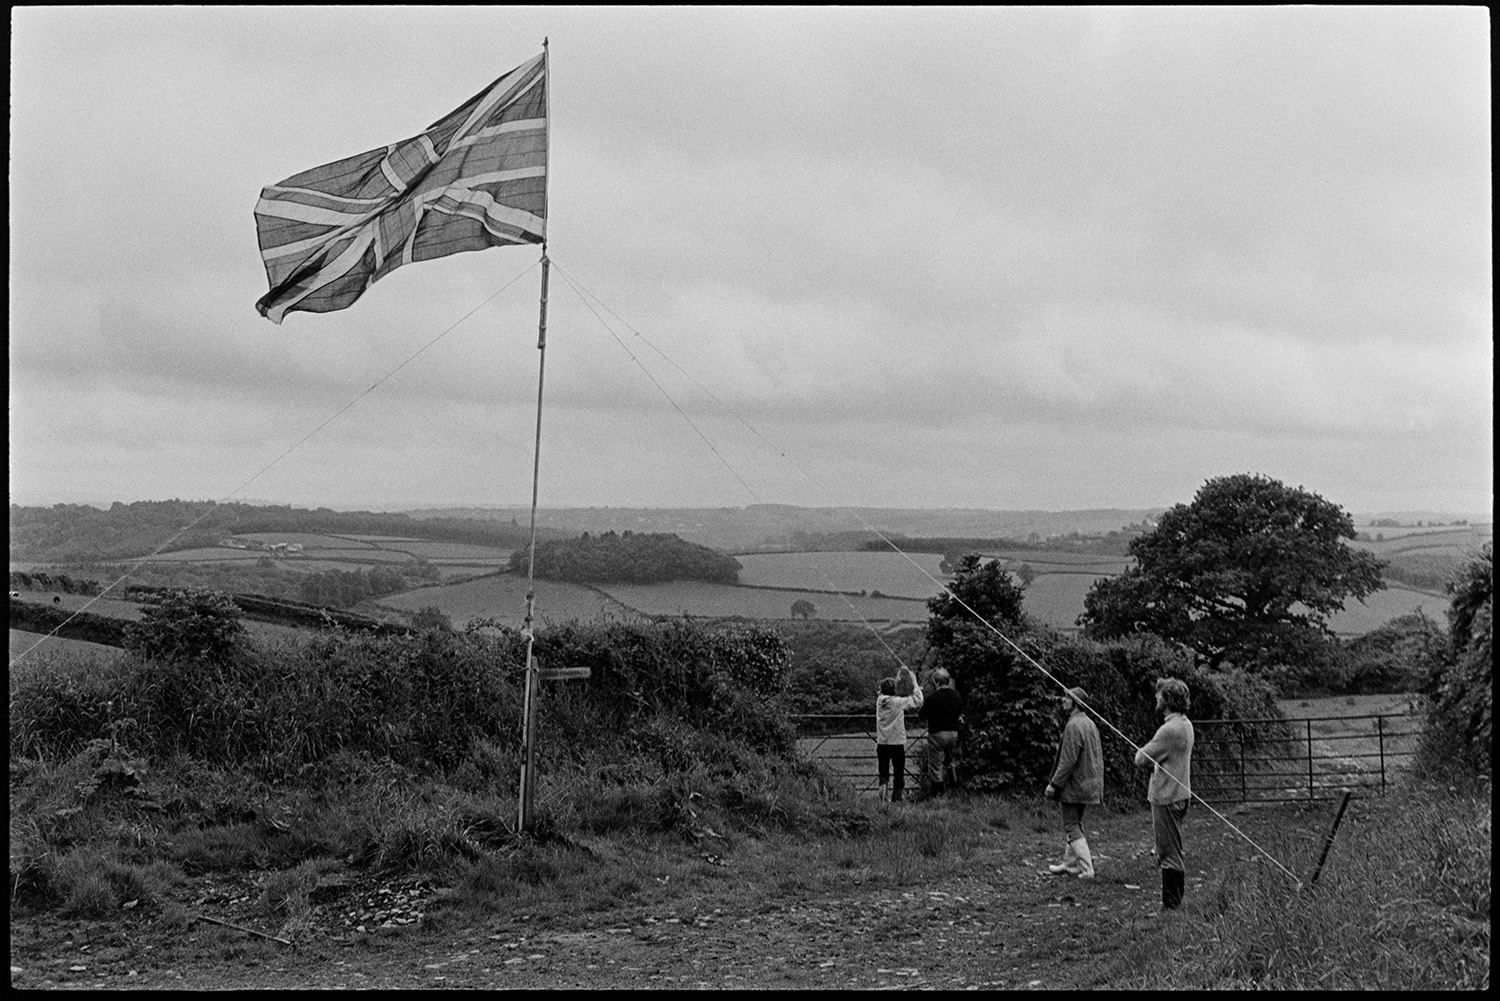 Hoisting the Jubilee flag in the countryside. 
[Three members of the Berry family hoisting a Union Jack flag by a field at South Harepath, Beaford, for Queen Elizabeth II Silver Jubilee.]